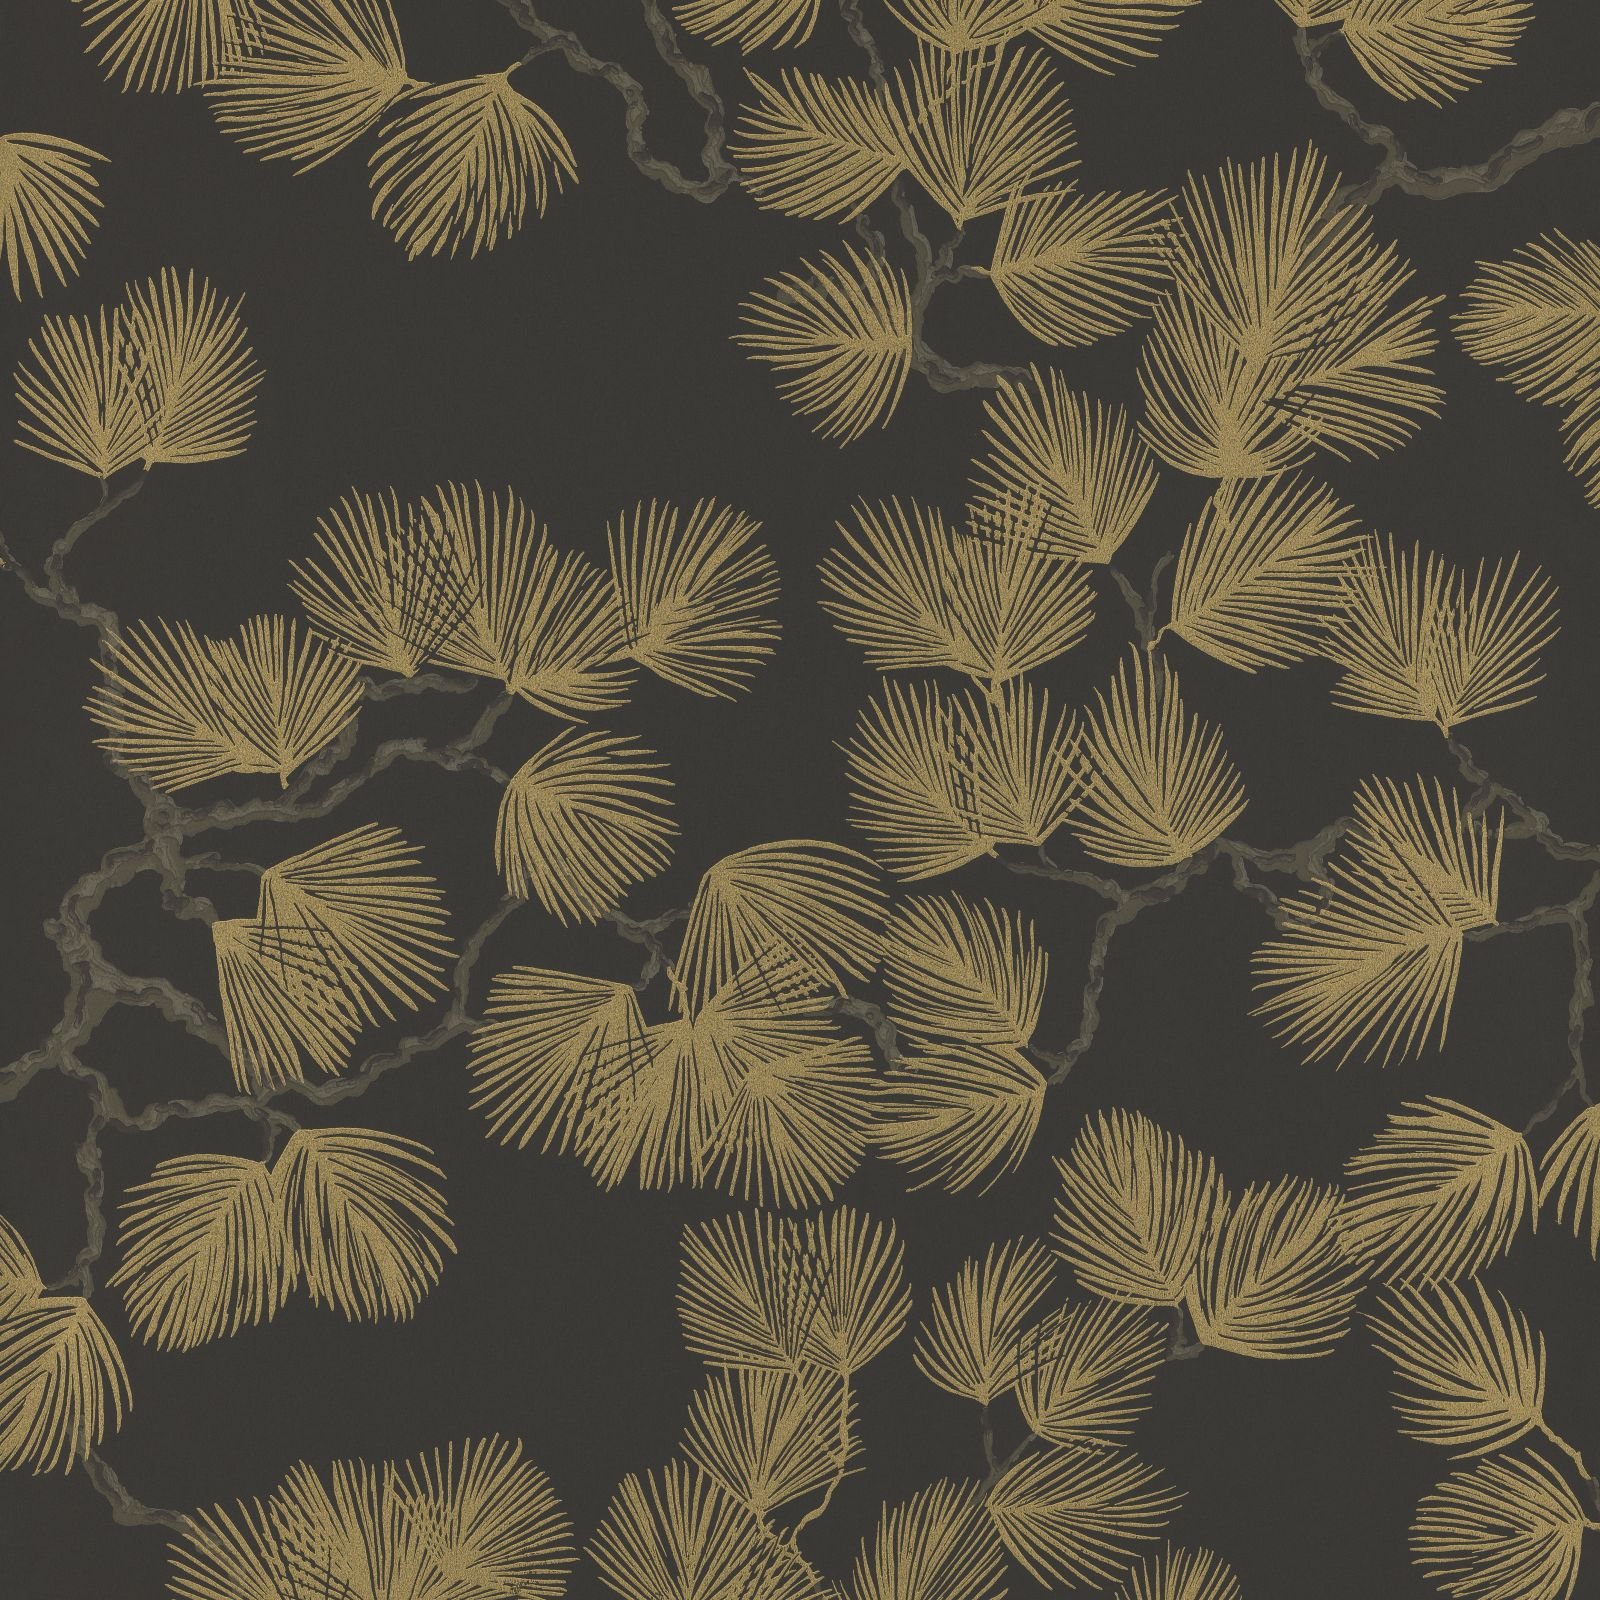 Pine wallpaper in a choice of 3 colourways